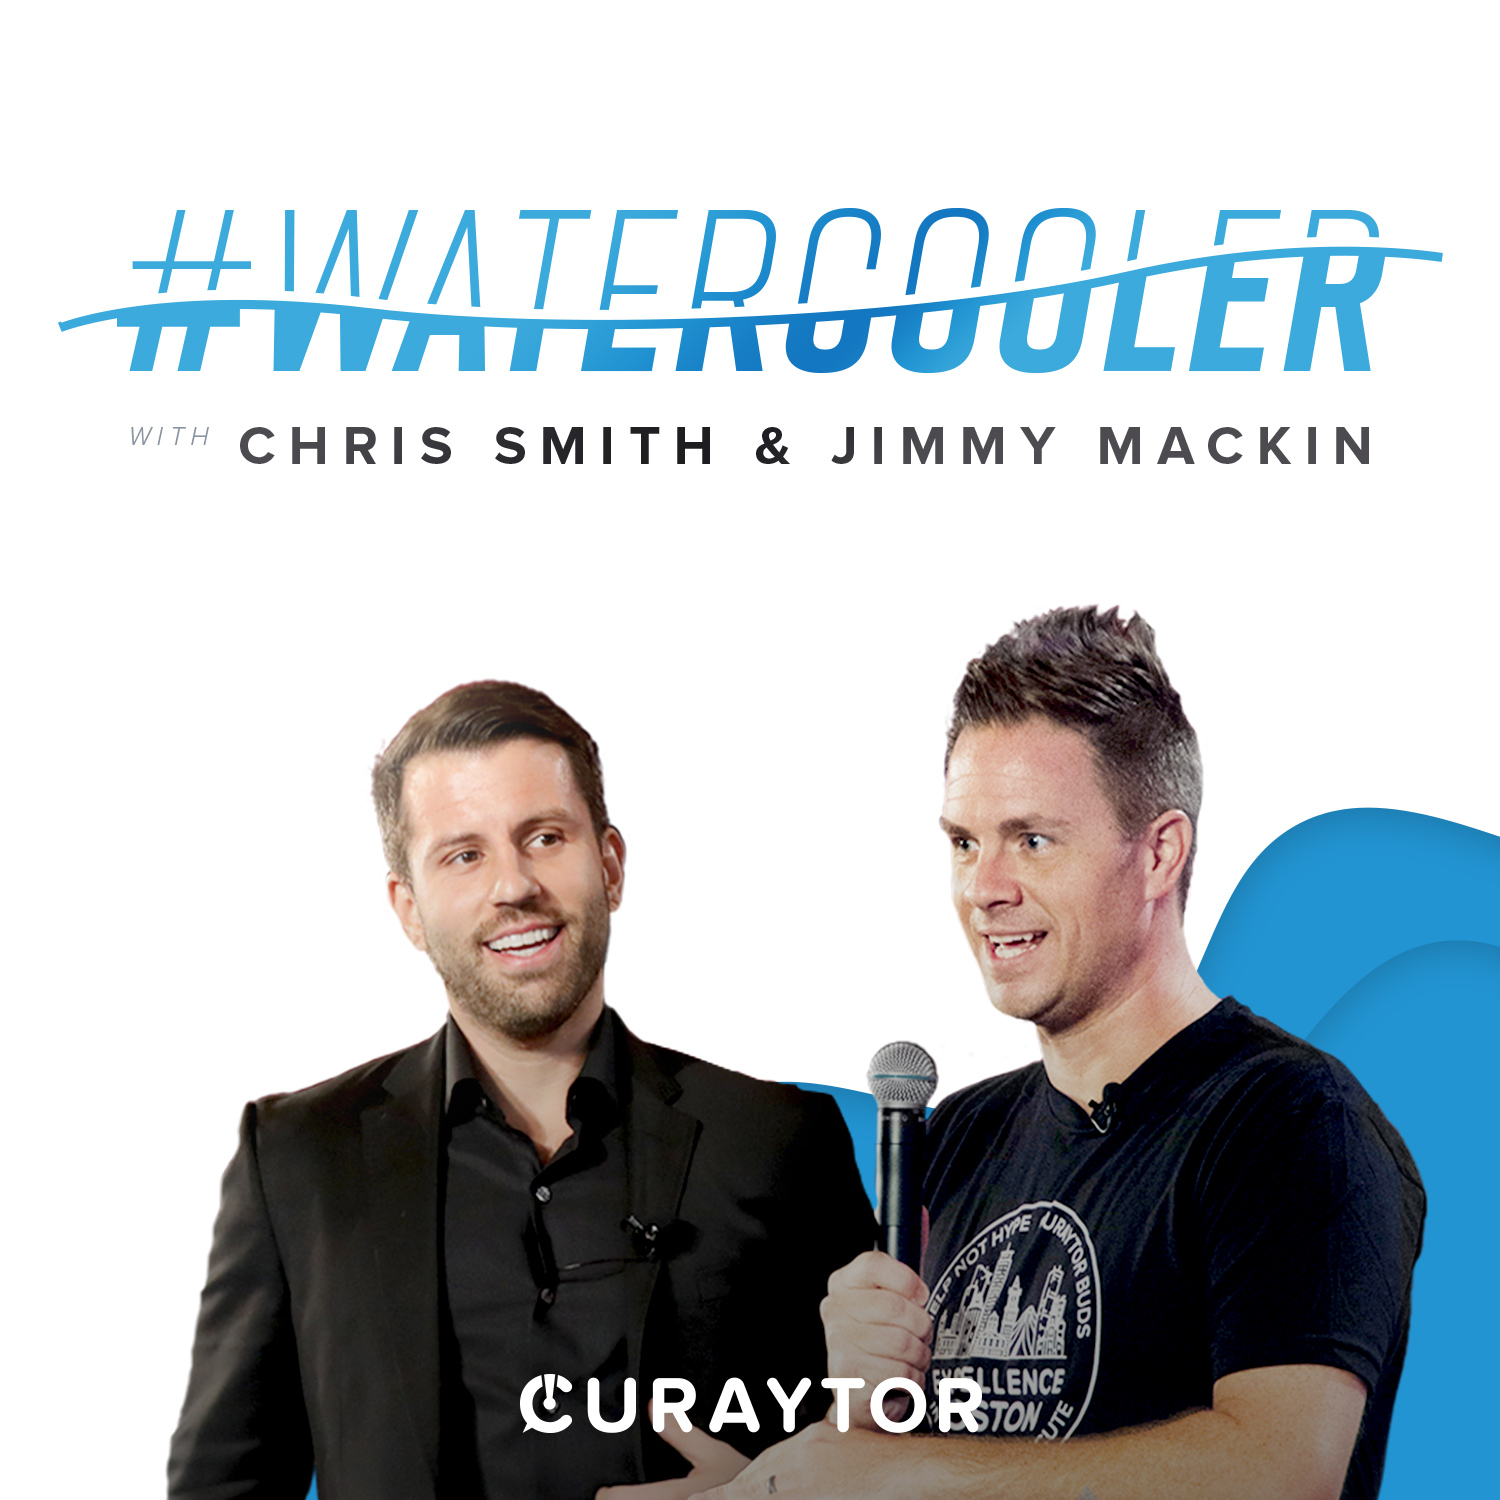 The #WaterCooler - Presented by Curaytor